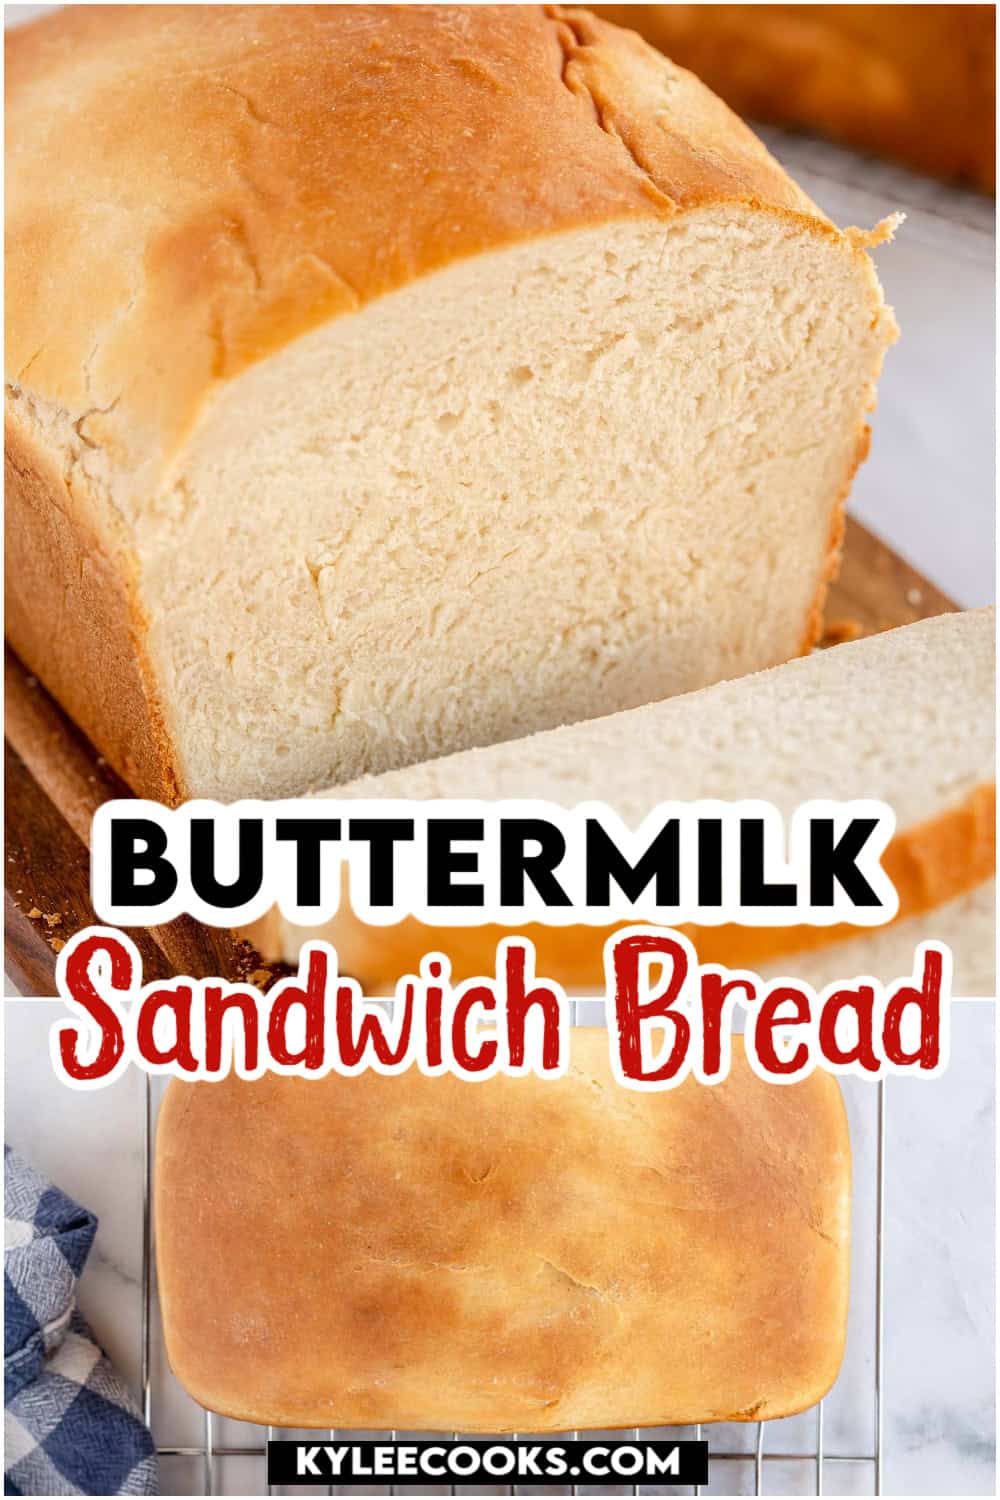 A loaf of buttermilk sandwich bread is shown. One image captures the whole loaf, while another displays the loaf cut to reveal the soft interior. The text "Buttermilk Sandwich Bread" is written on the image.